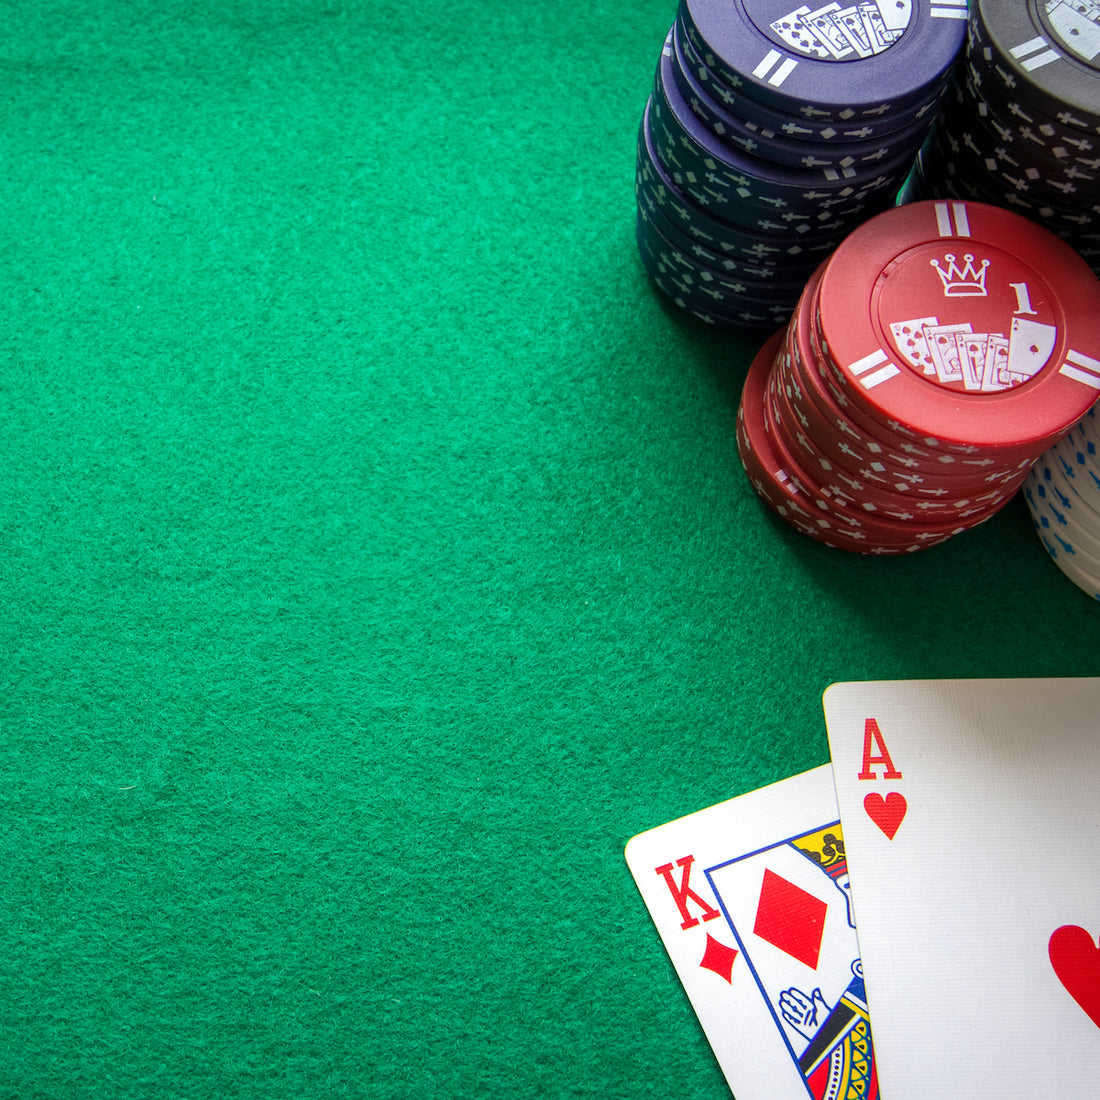 How to Choose the Right Felt for Your Home Poker Table - Just Poker Tables